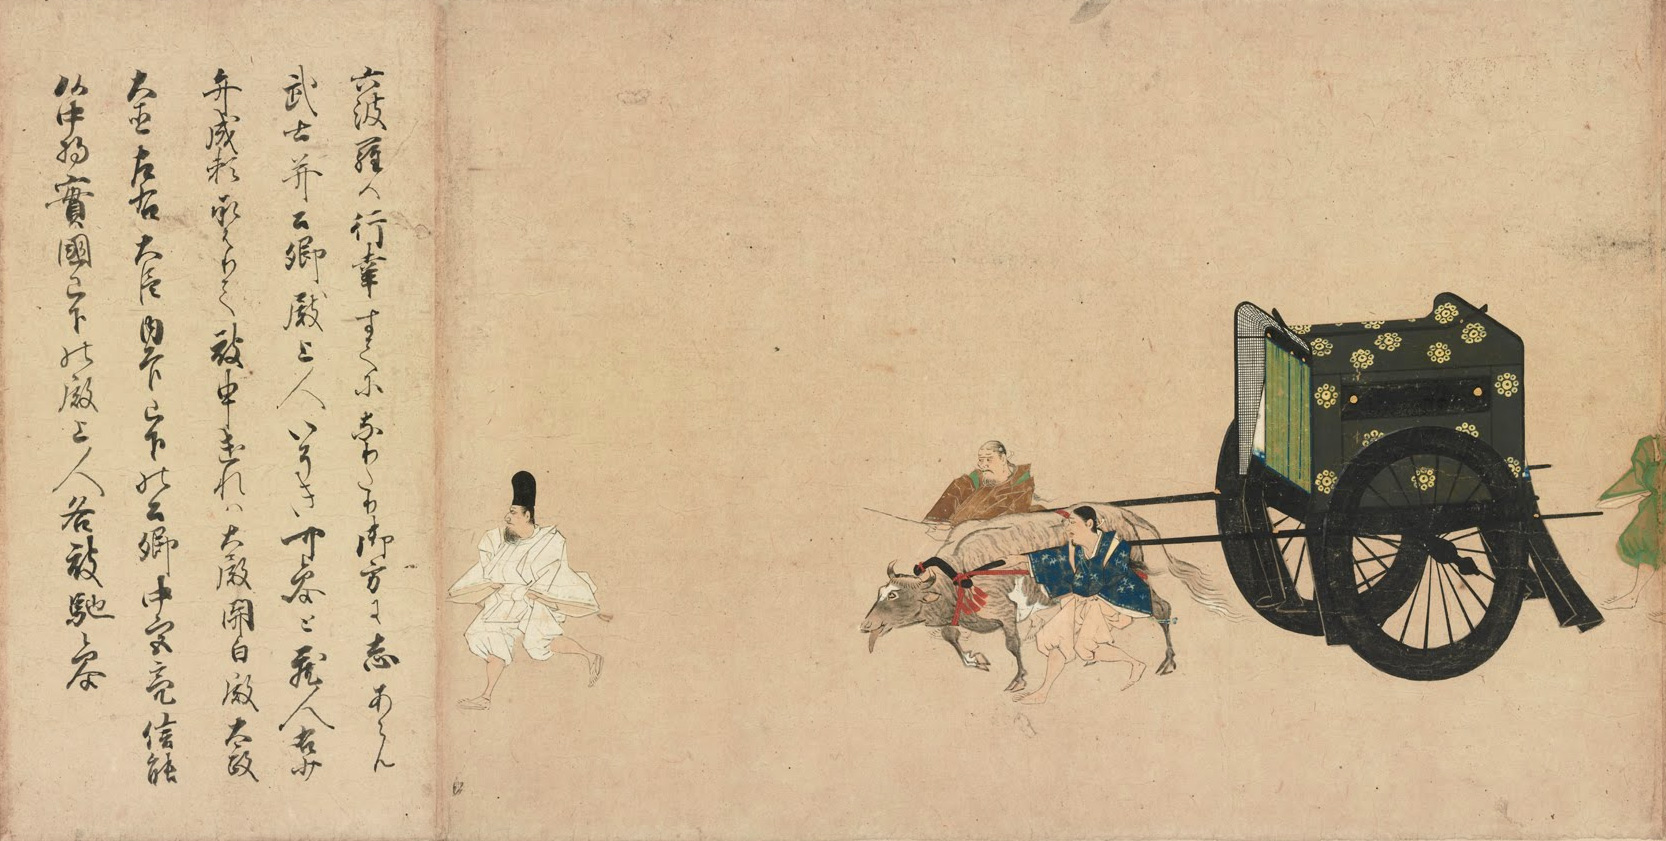 Illustrated Tale of the Heiji Civil War: Scroll of the Imperial Visit to Rokuhara, housed at the Tokyo National Museum, illustrates some events of the Heiji Rebellion